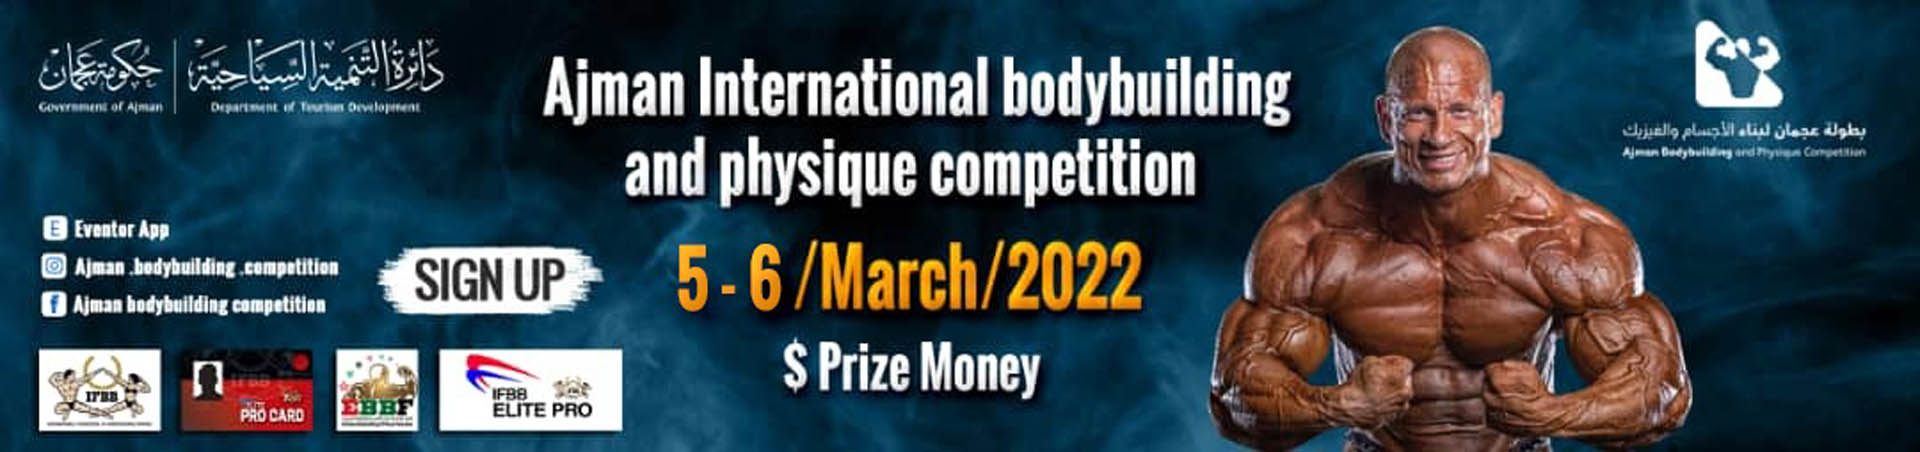 IFBB Ajman Bodybuilding and Physique competition